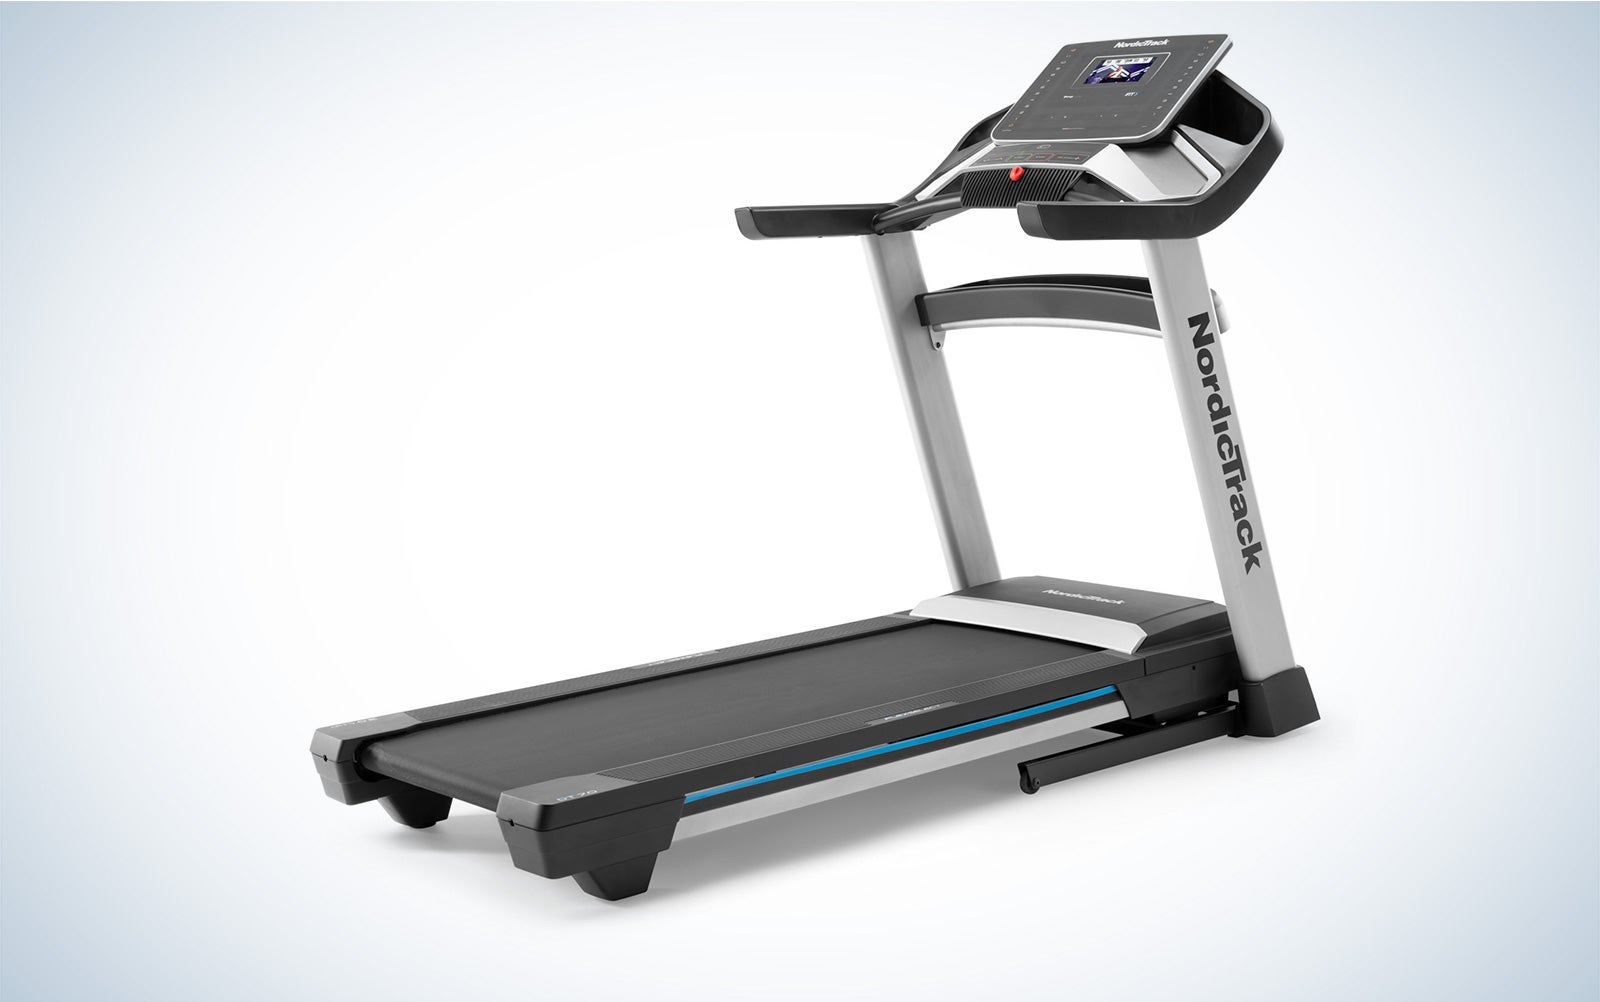 NordicTrack 7i treadmill on a plain background